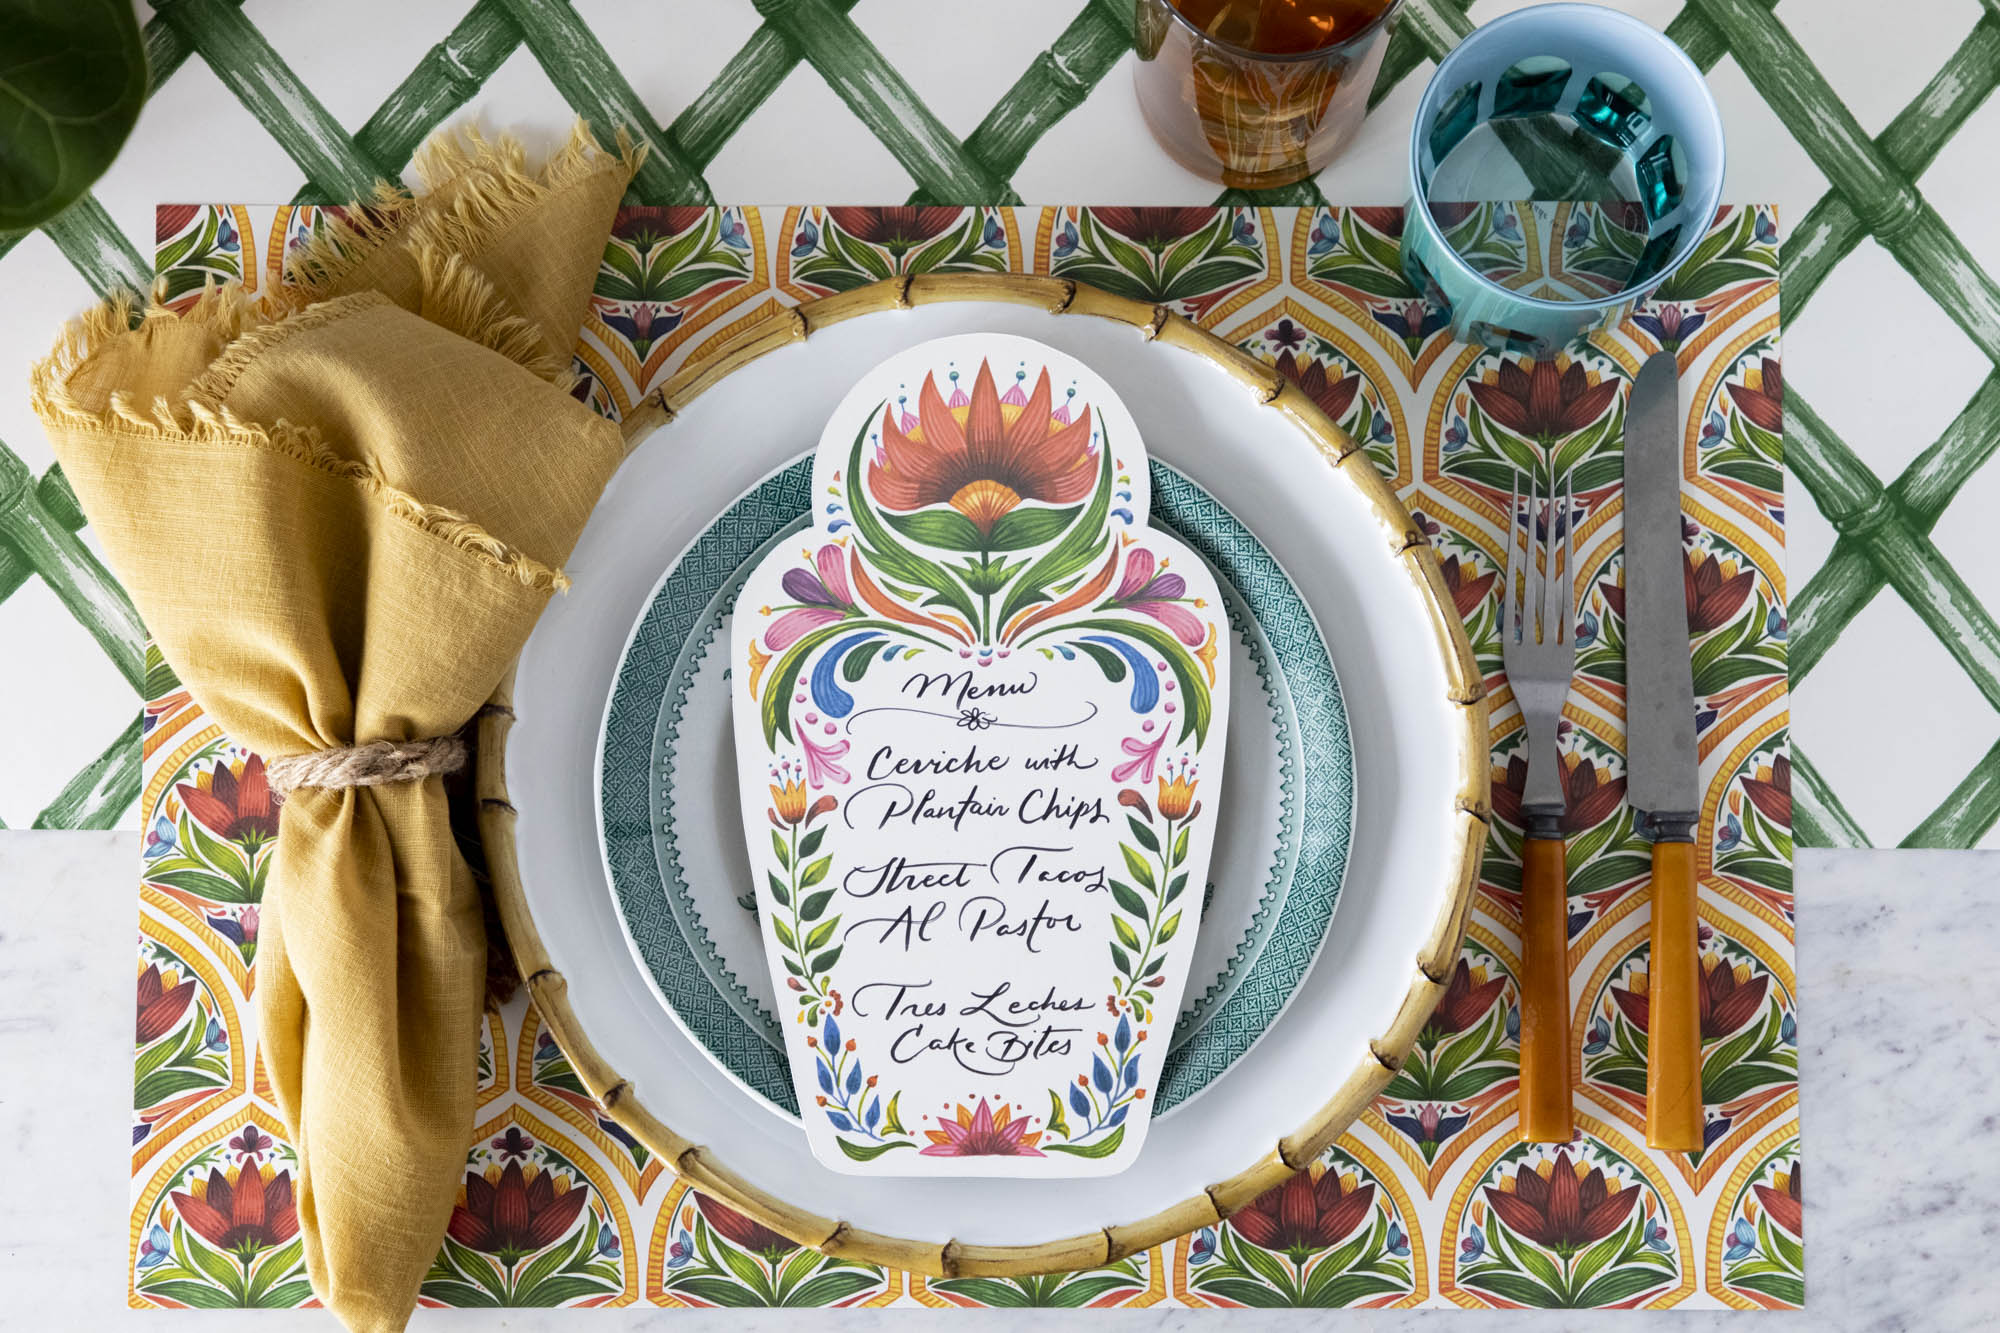 The Fiesta Floral Tile Placemat used in a festive place setting, from above.